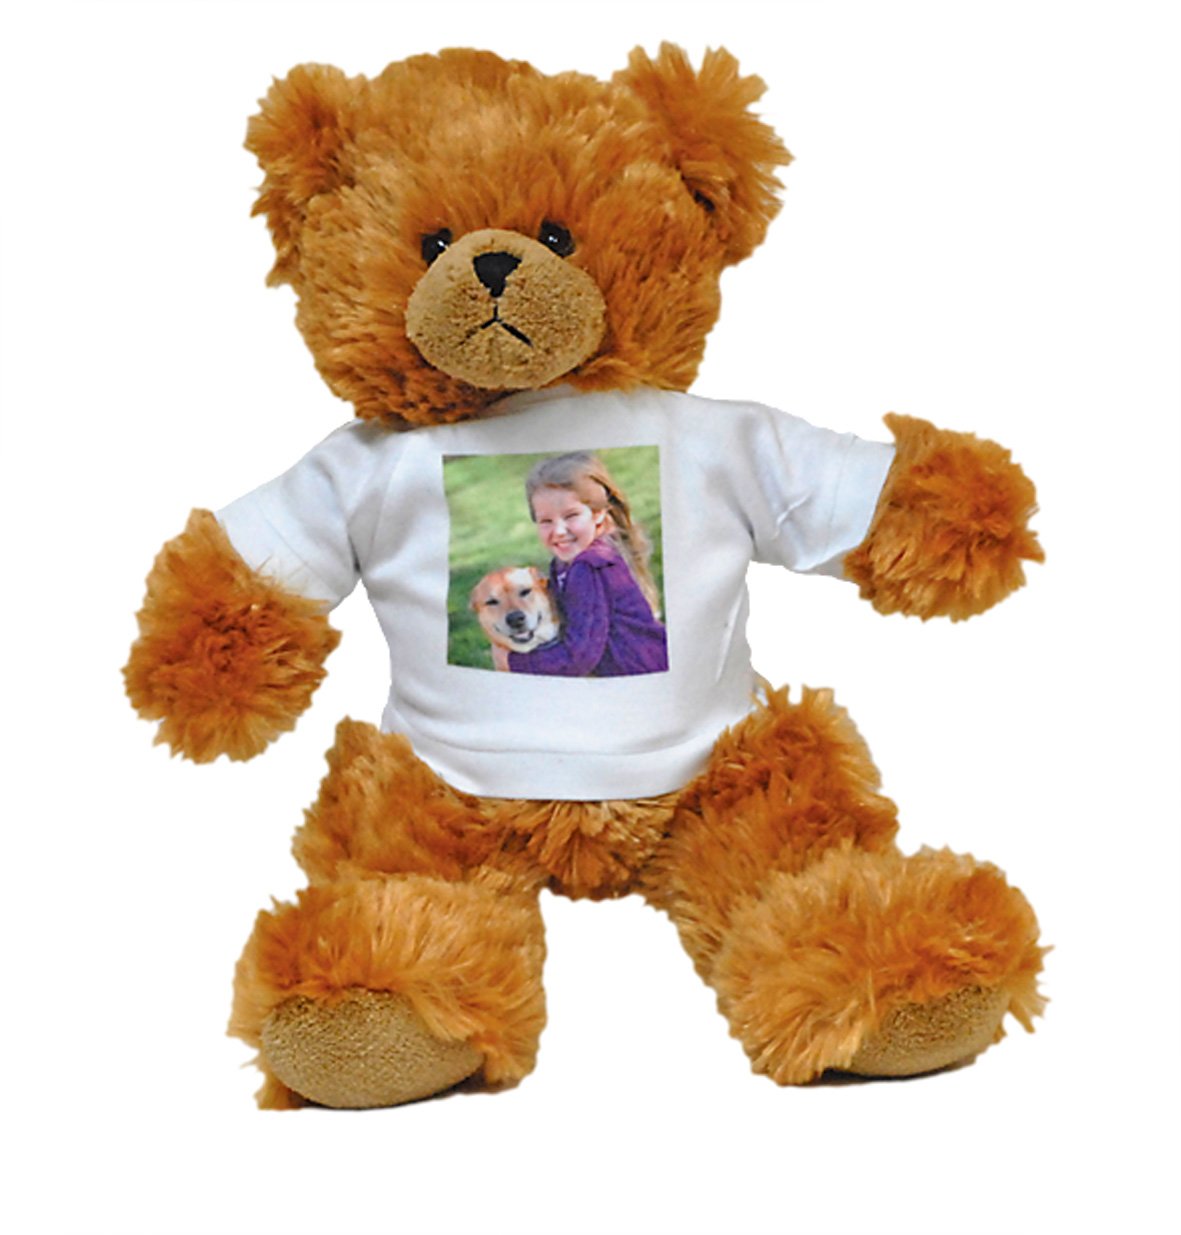 teddy bear one day delivery